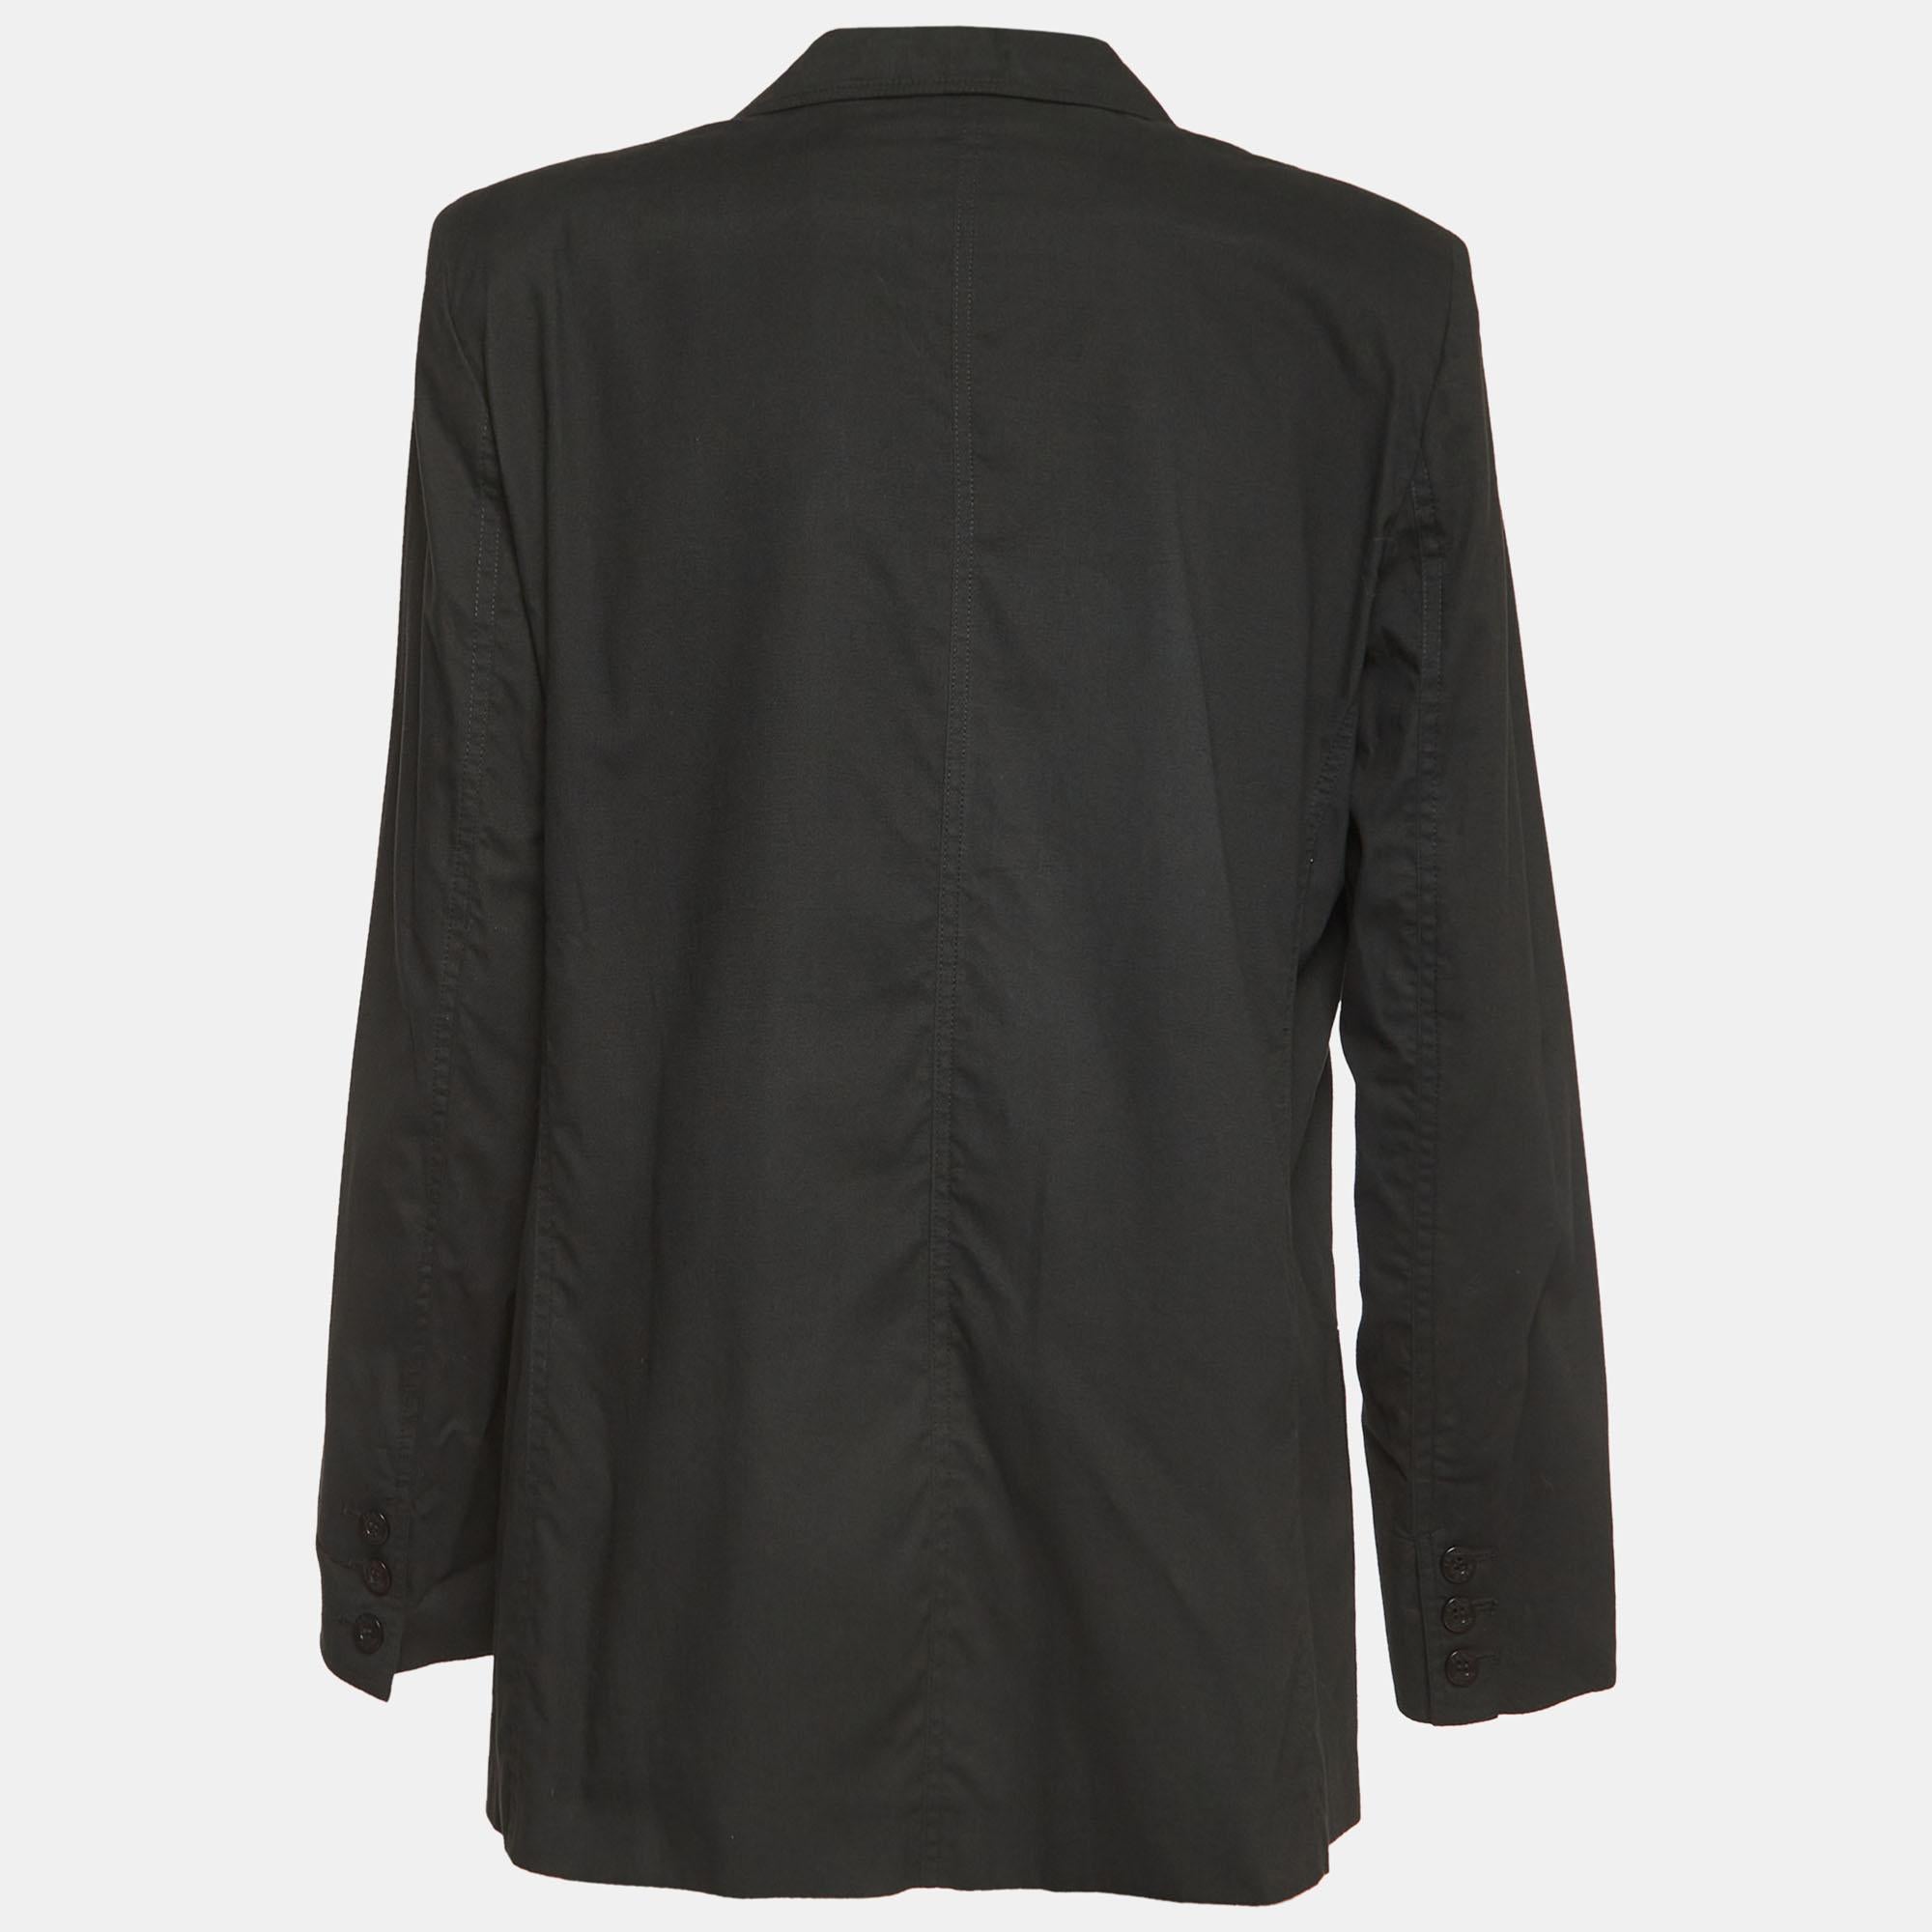 This blazer brings you both class and luxury as you wear it. It is highlighted with long sleeves and classic details, thus granting a polished, formal finish.

Includes: Brand Tag
